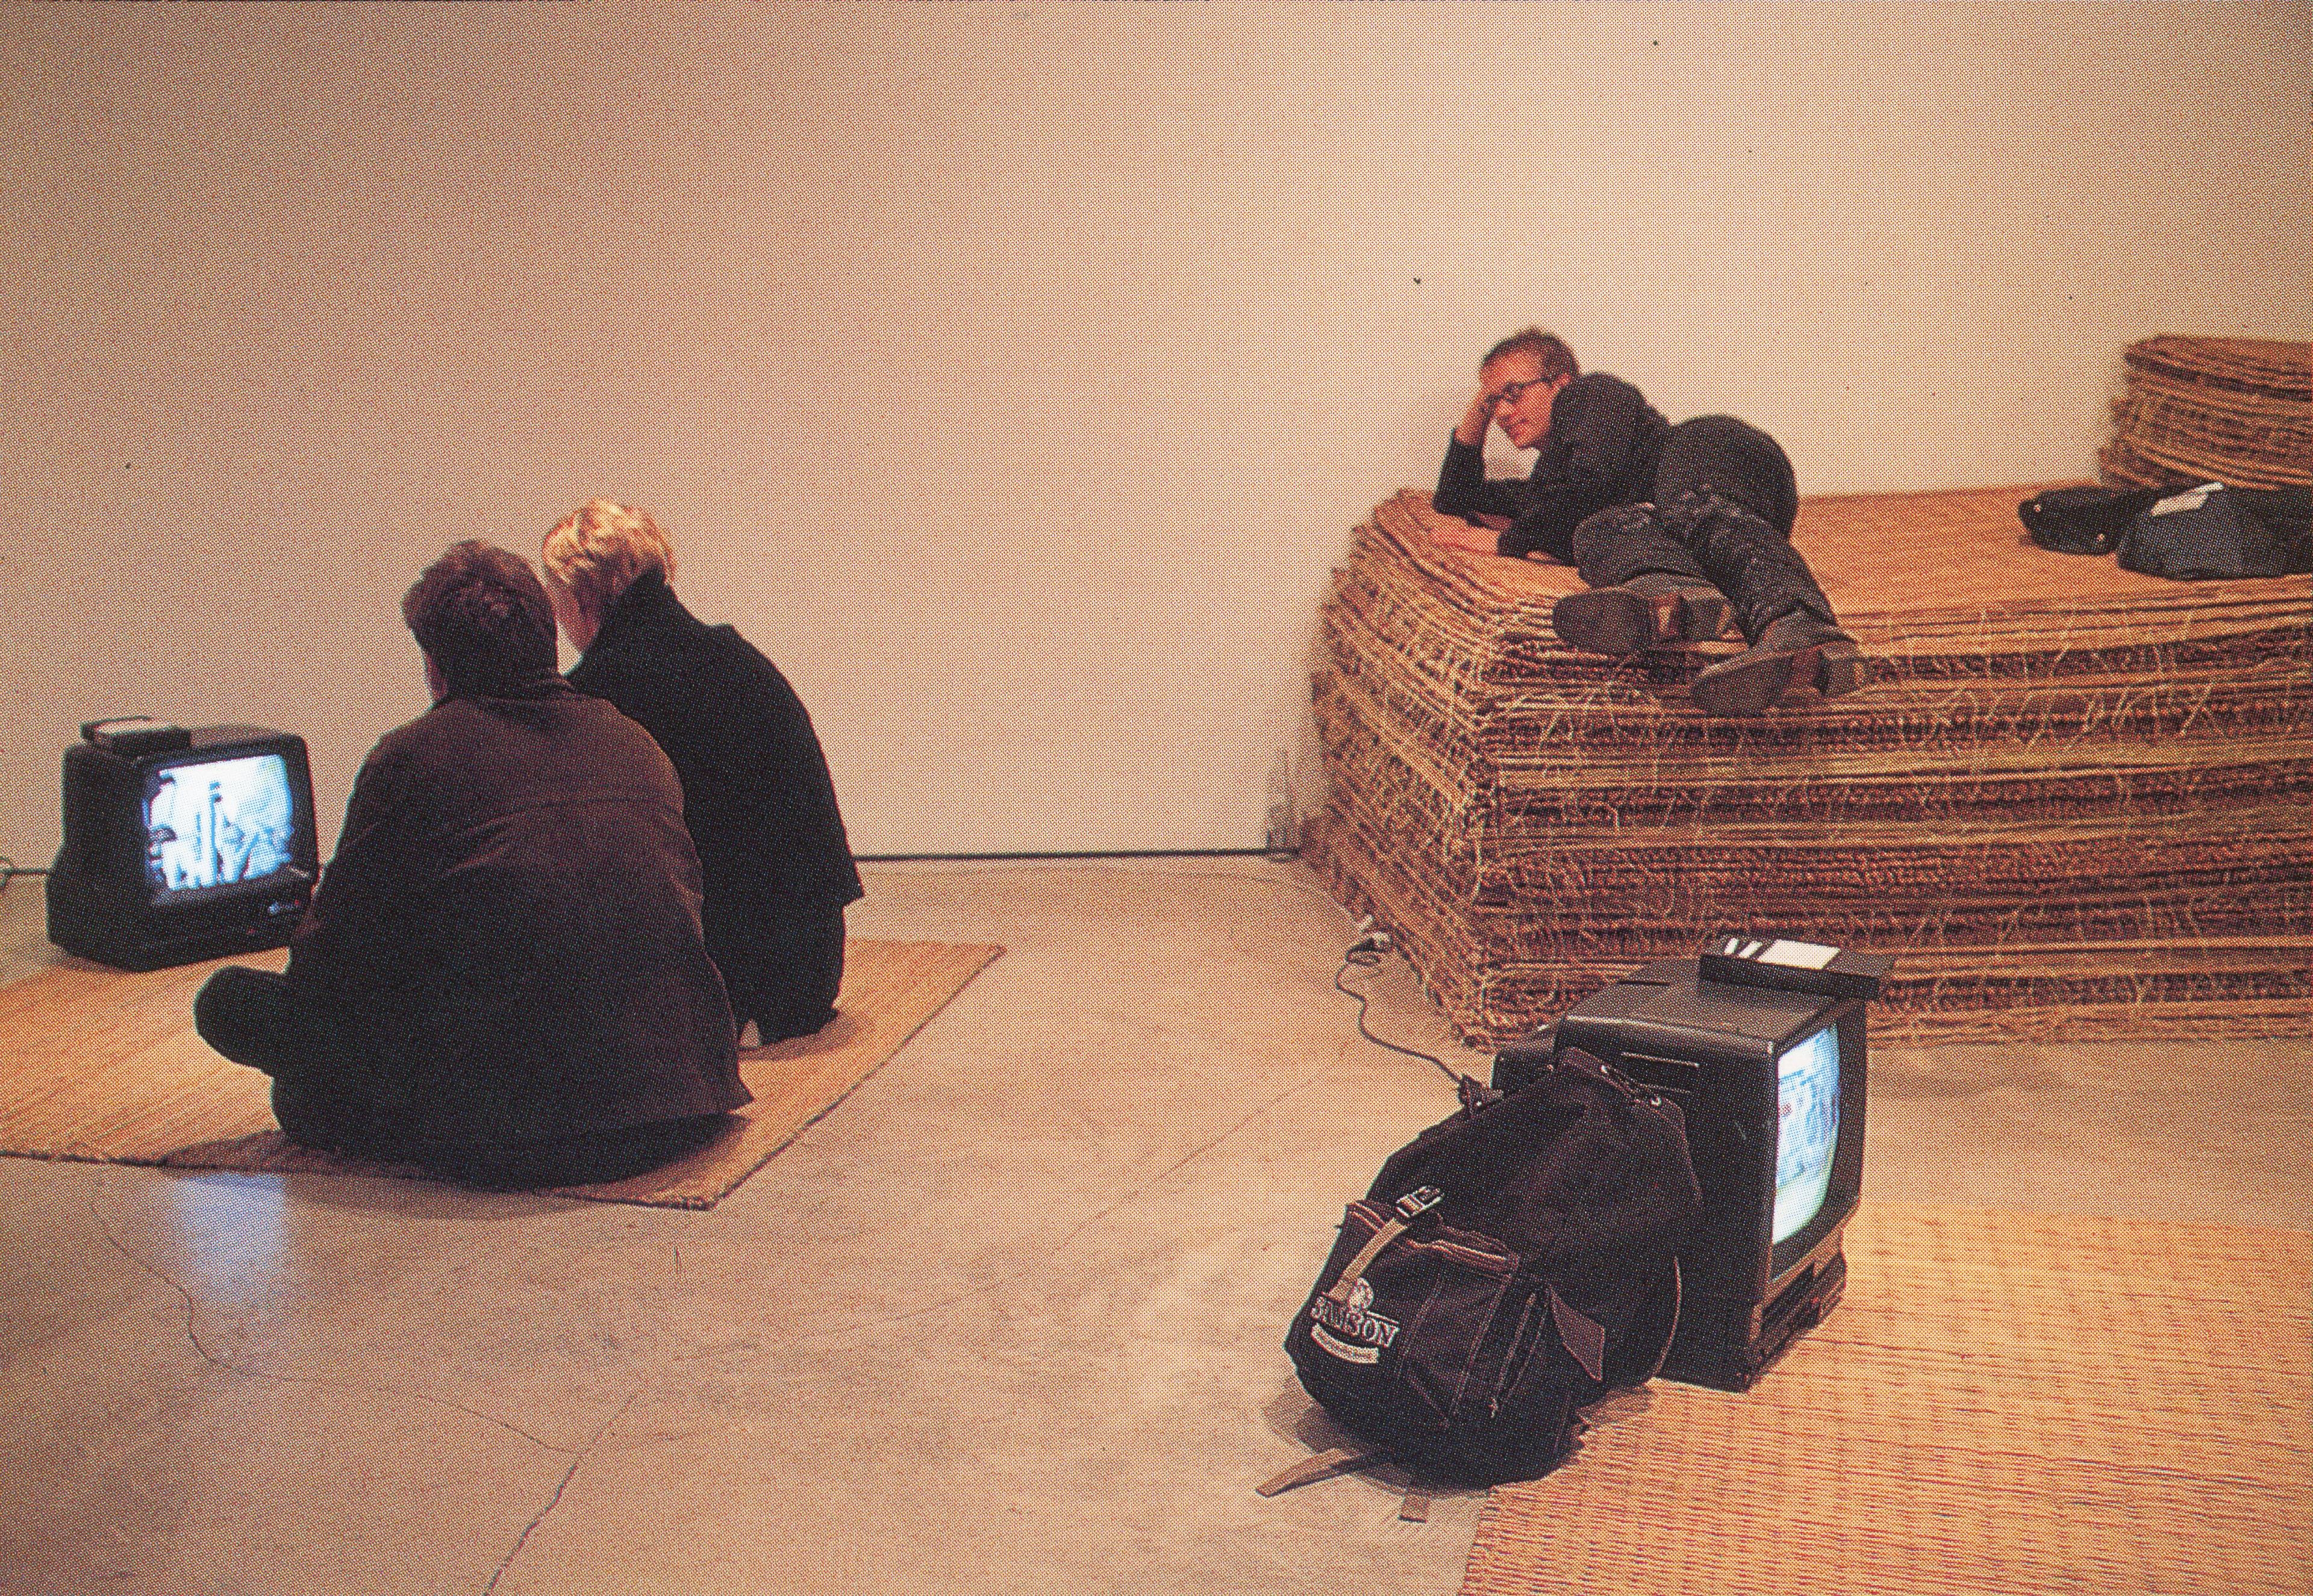 A rush mat and a CRT TV are placed on a gallery floor. Two people sit on a mat and are watching the video played on the TV. Behind them, a person lies on a pile of rush mats.